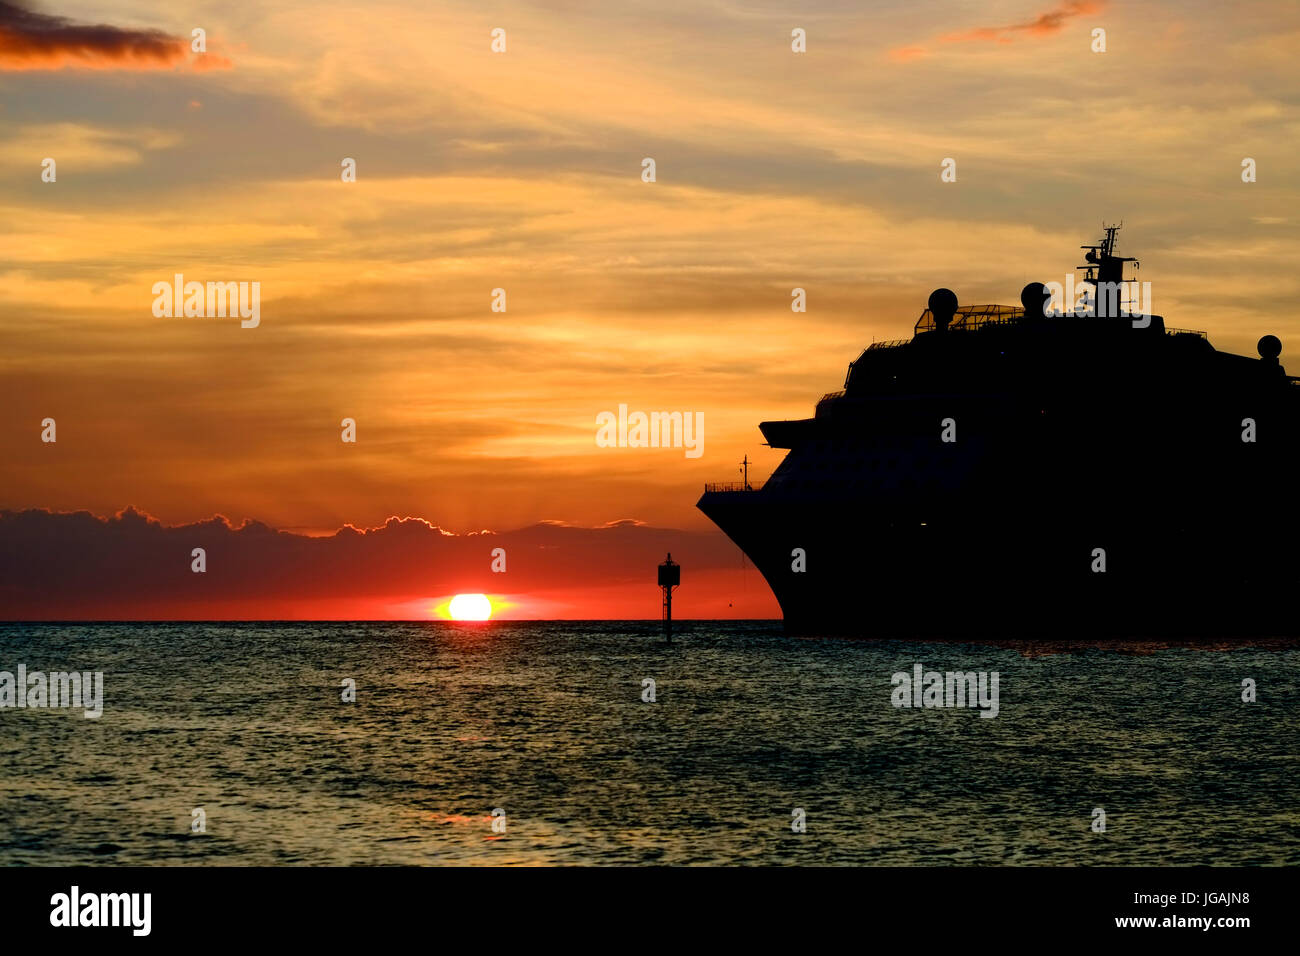 Willemstad, Curacao, Netherlands Antilles, Caribbean sunset on cruise ship silhouette Stock Photo